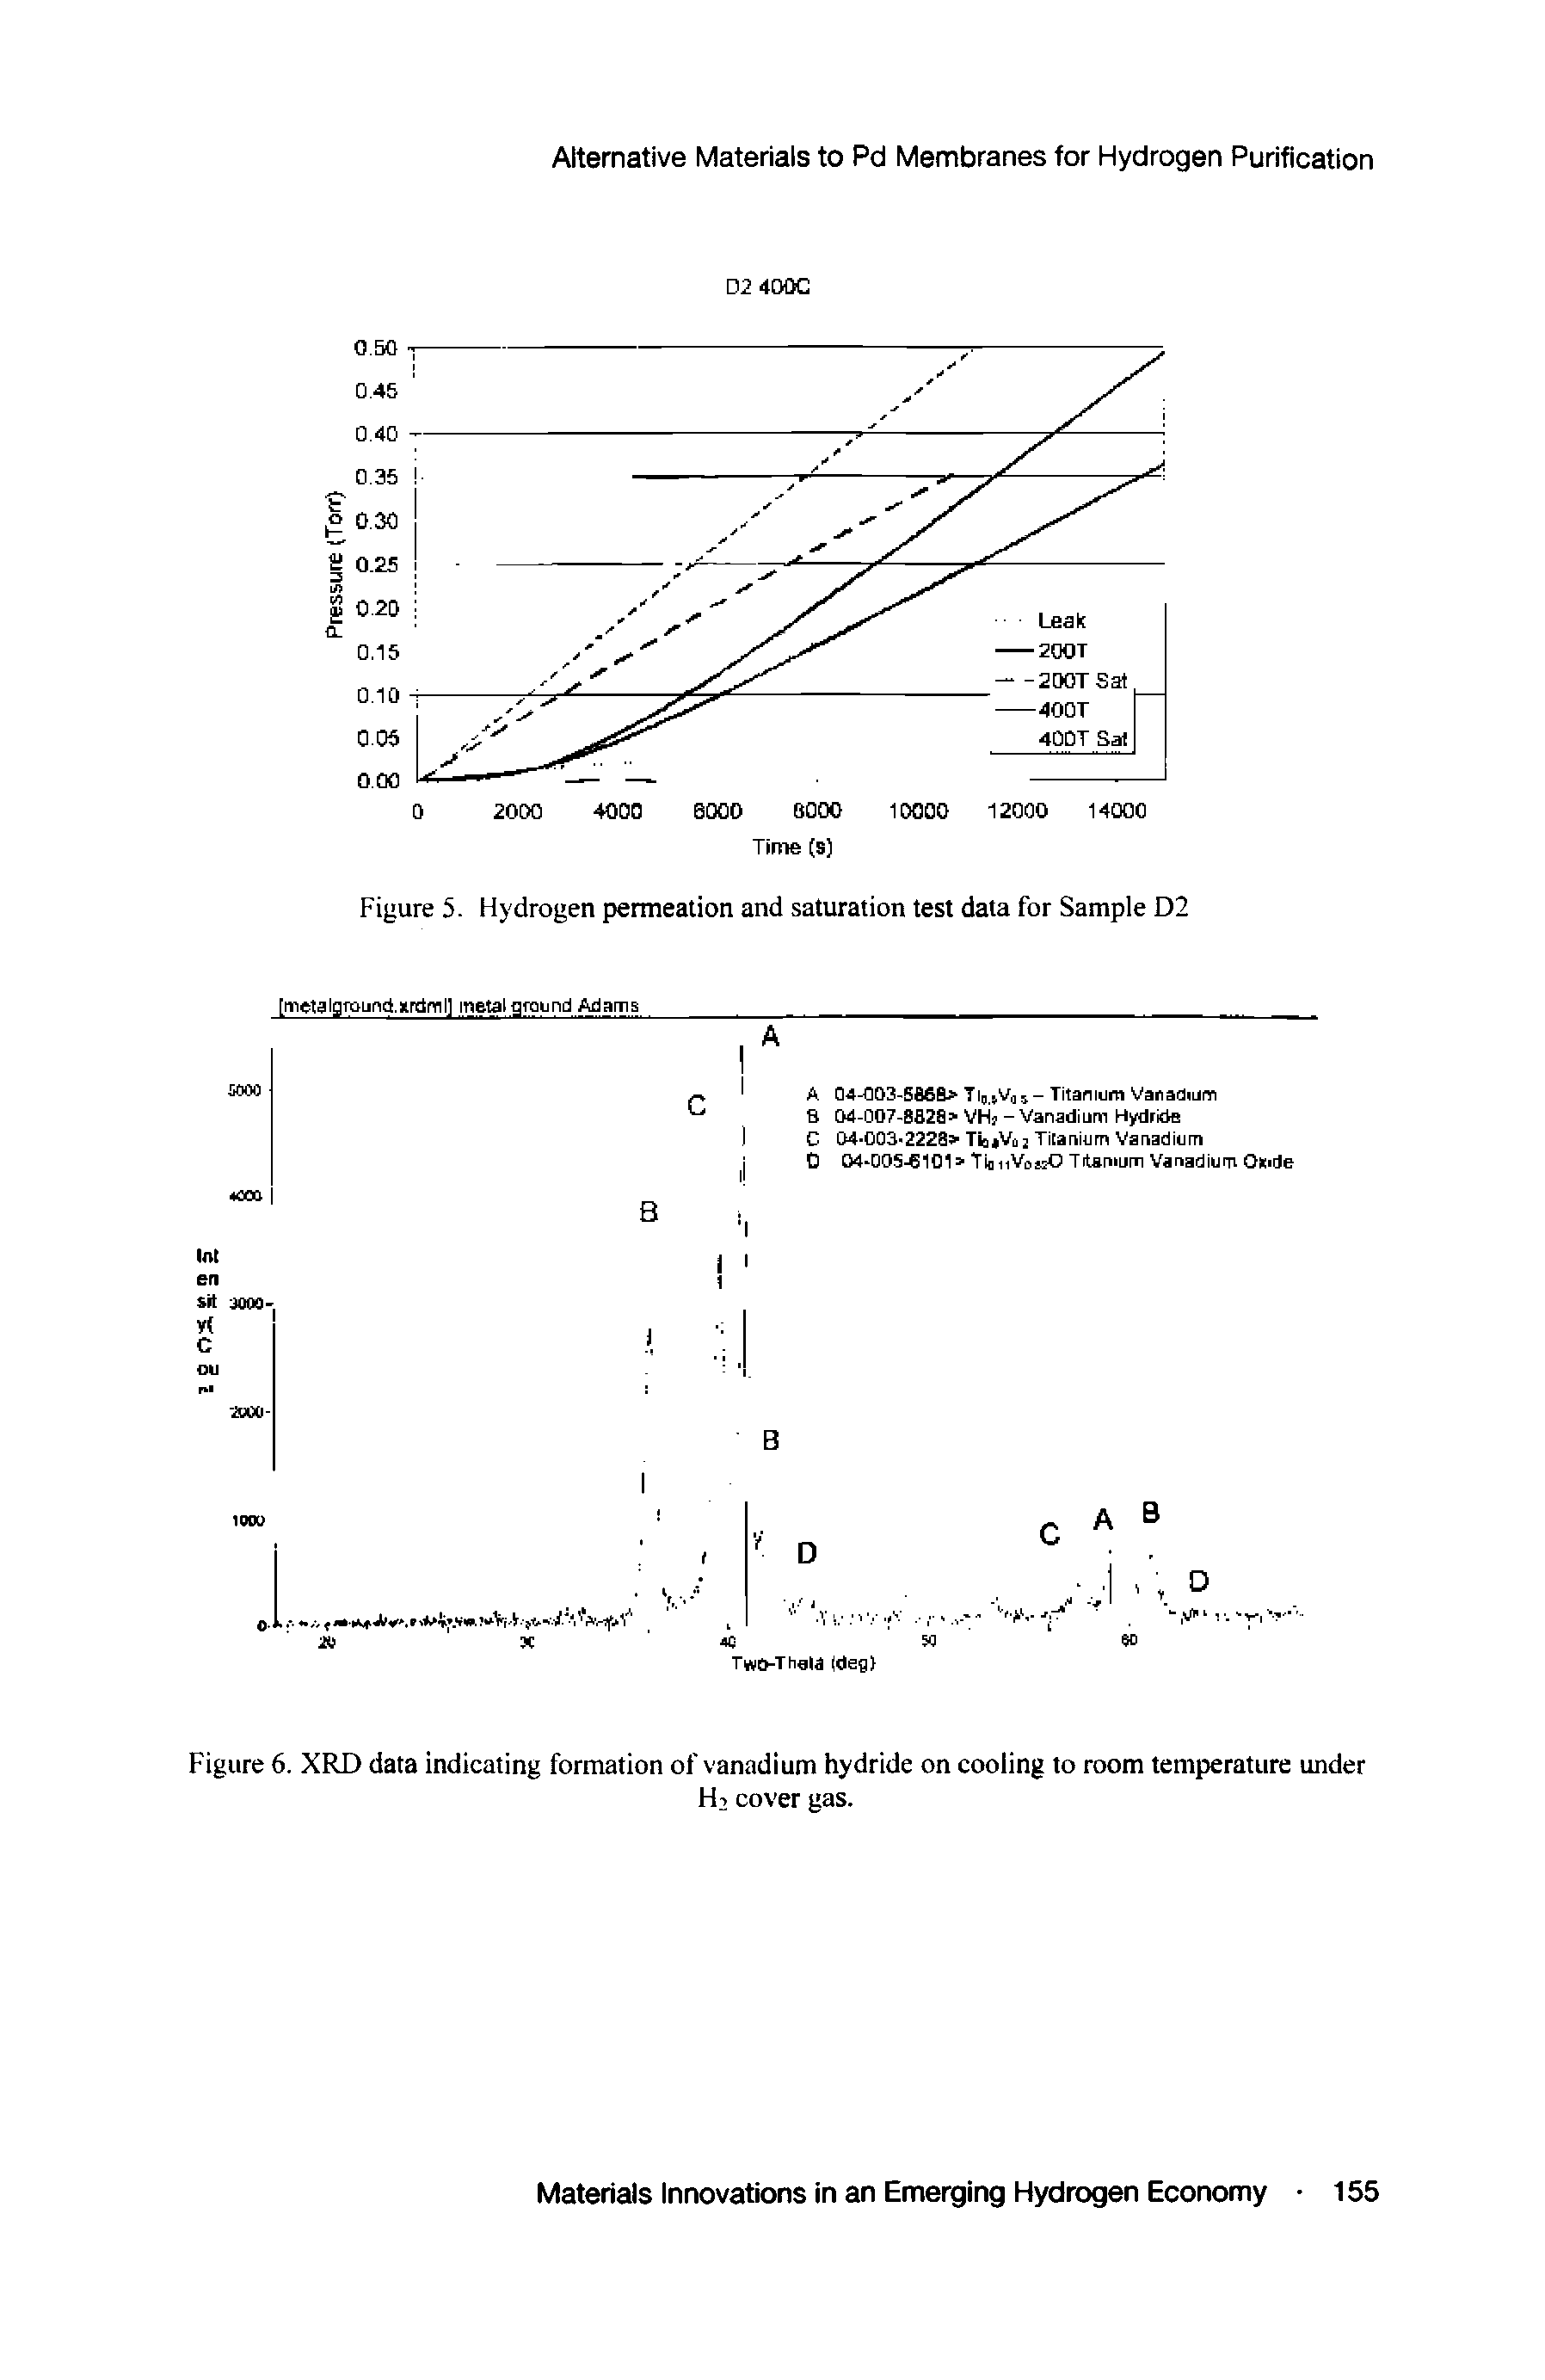 Figure 6. XRD data indicating formation of vanadium hydride on cooling to room temperature under...